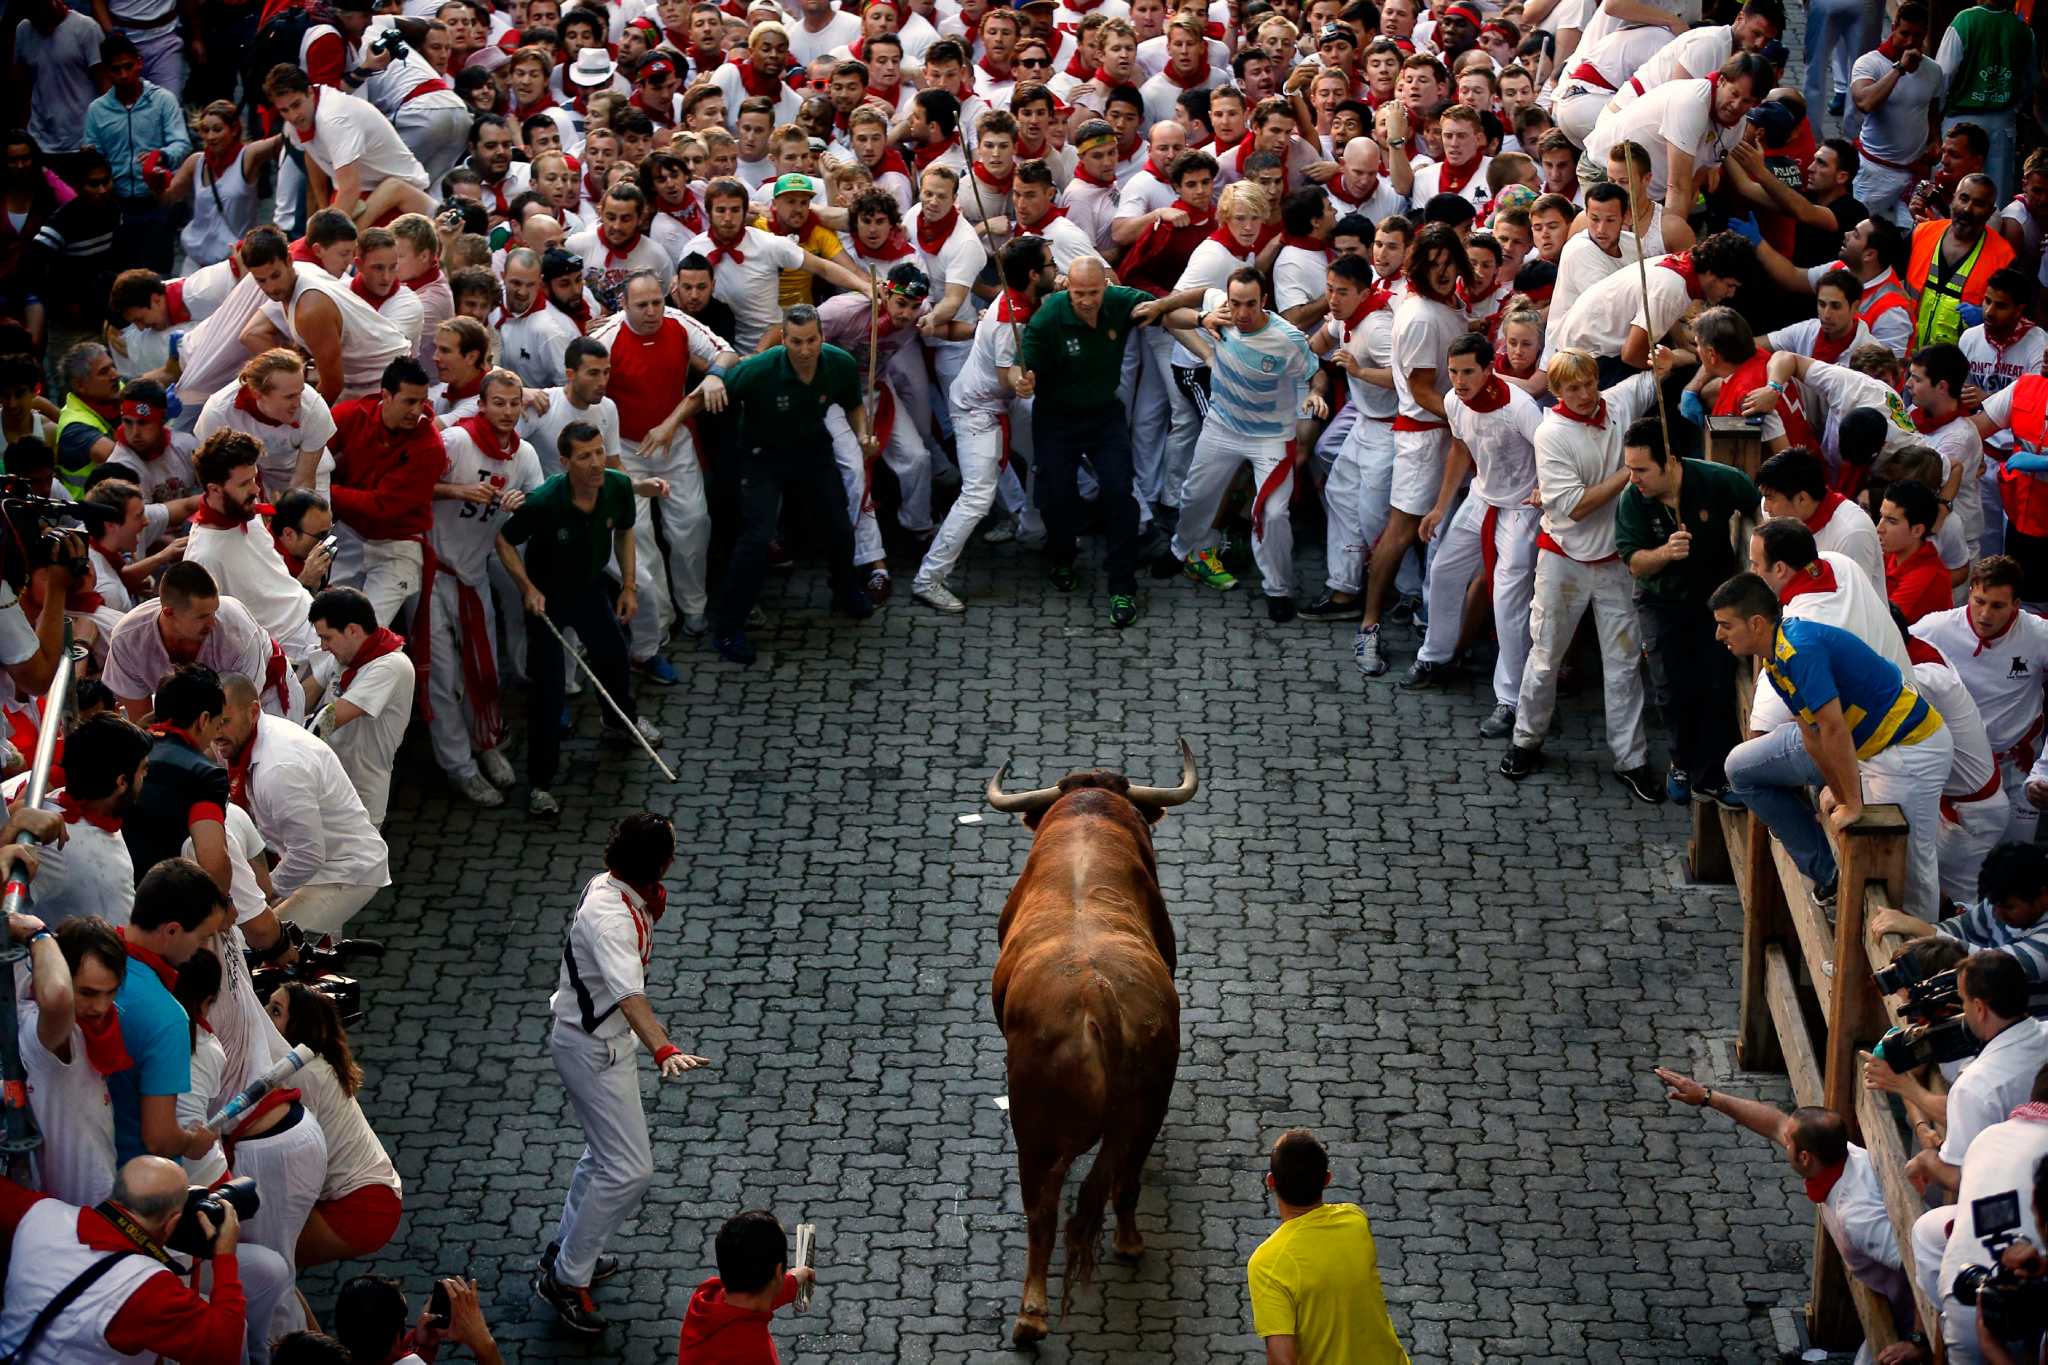 Two hurt in first day of Spain bull running